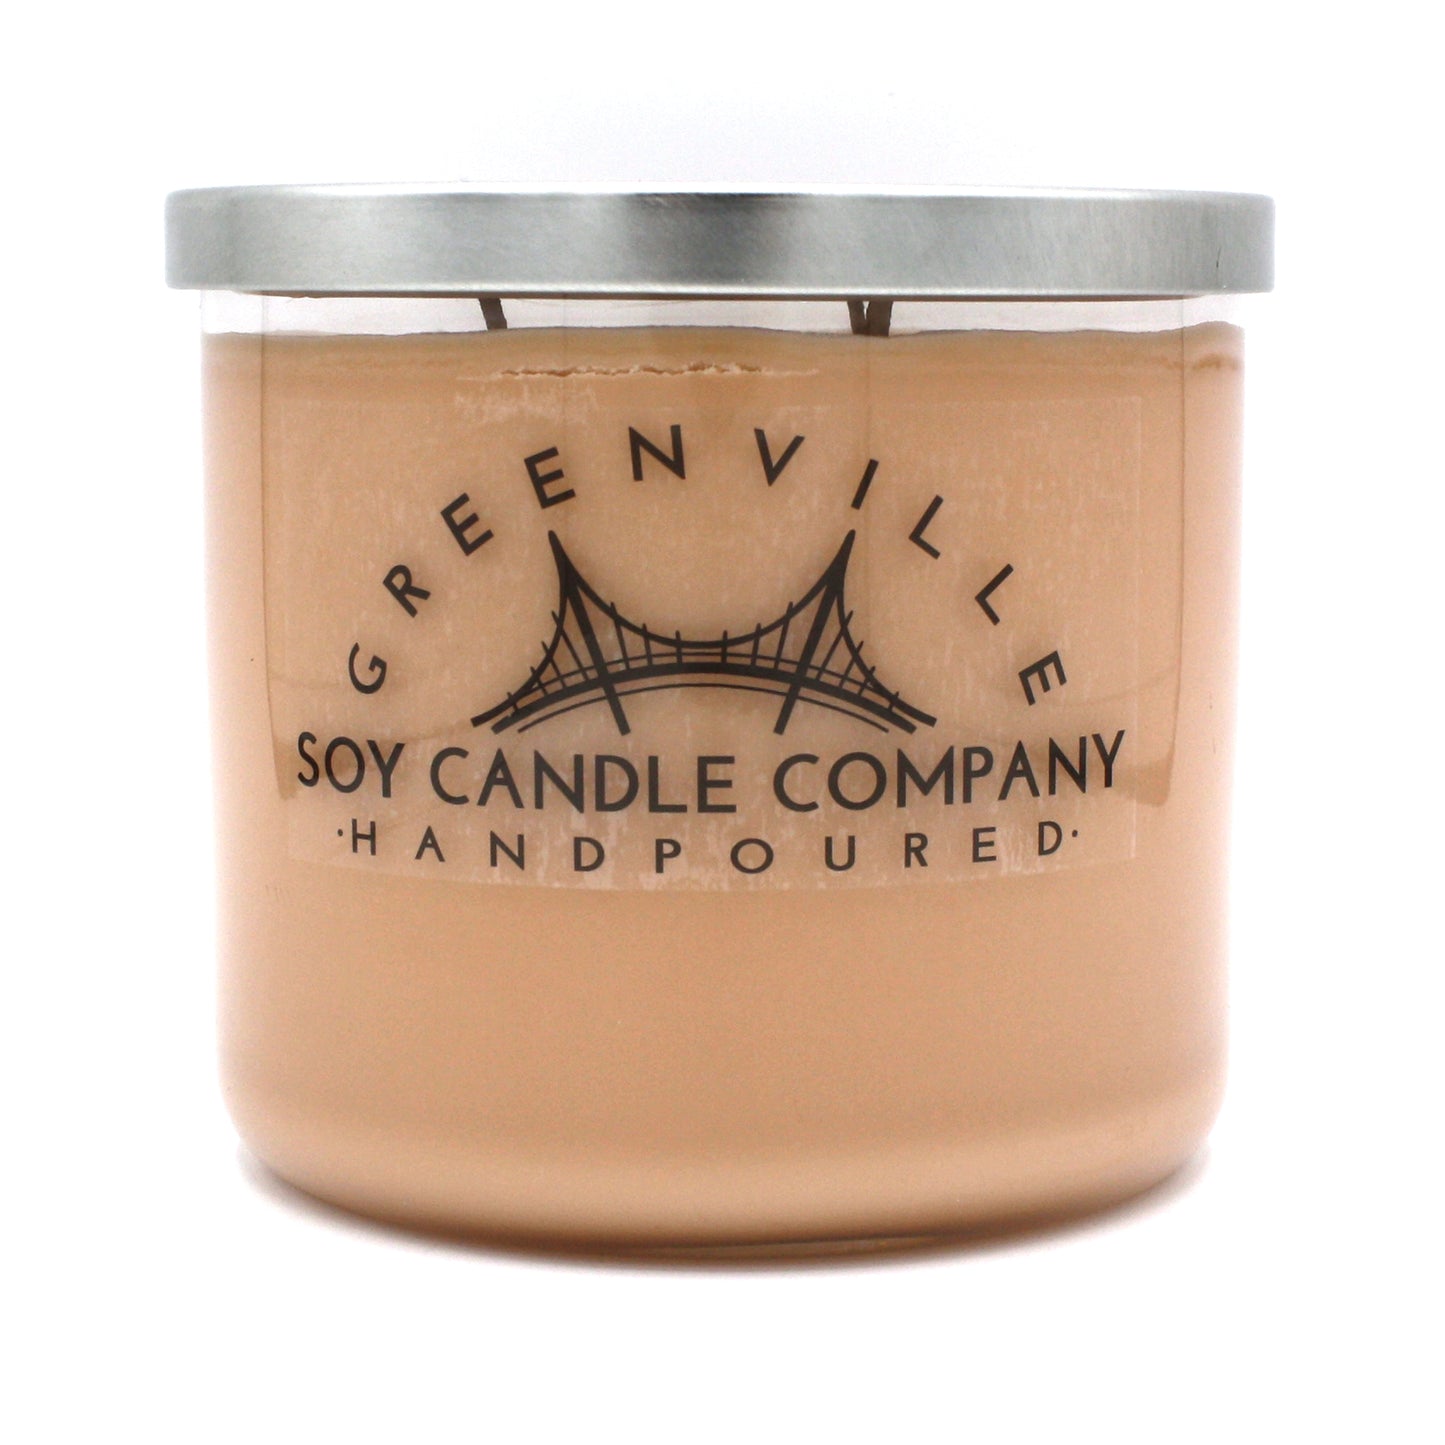 Cookie Shop, 18oz Soy Candle